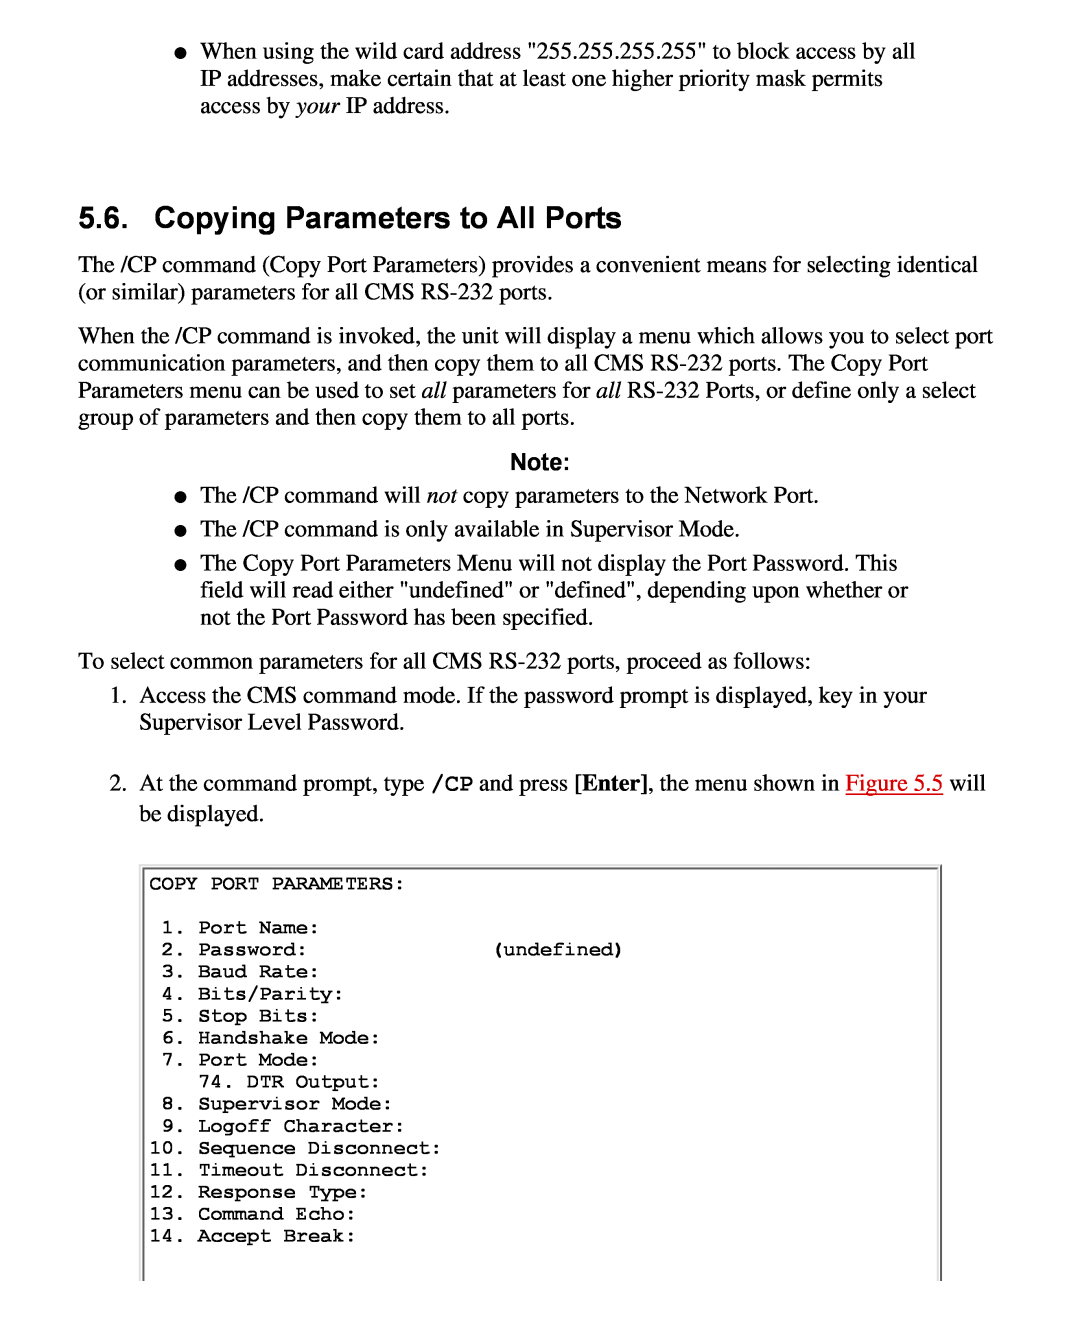 Western Telematic CMS-16 manual Copying Parameters to All Ports 